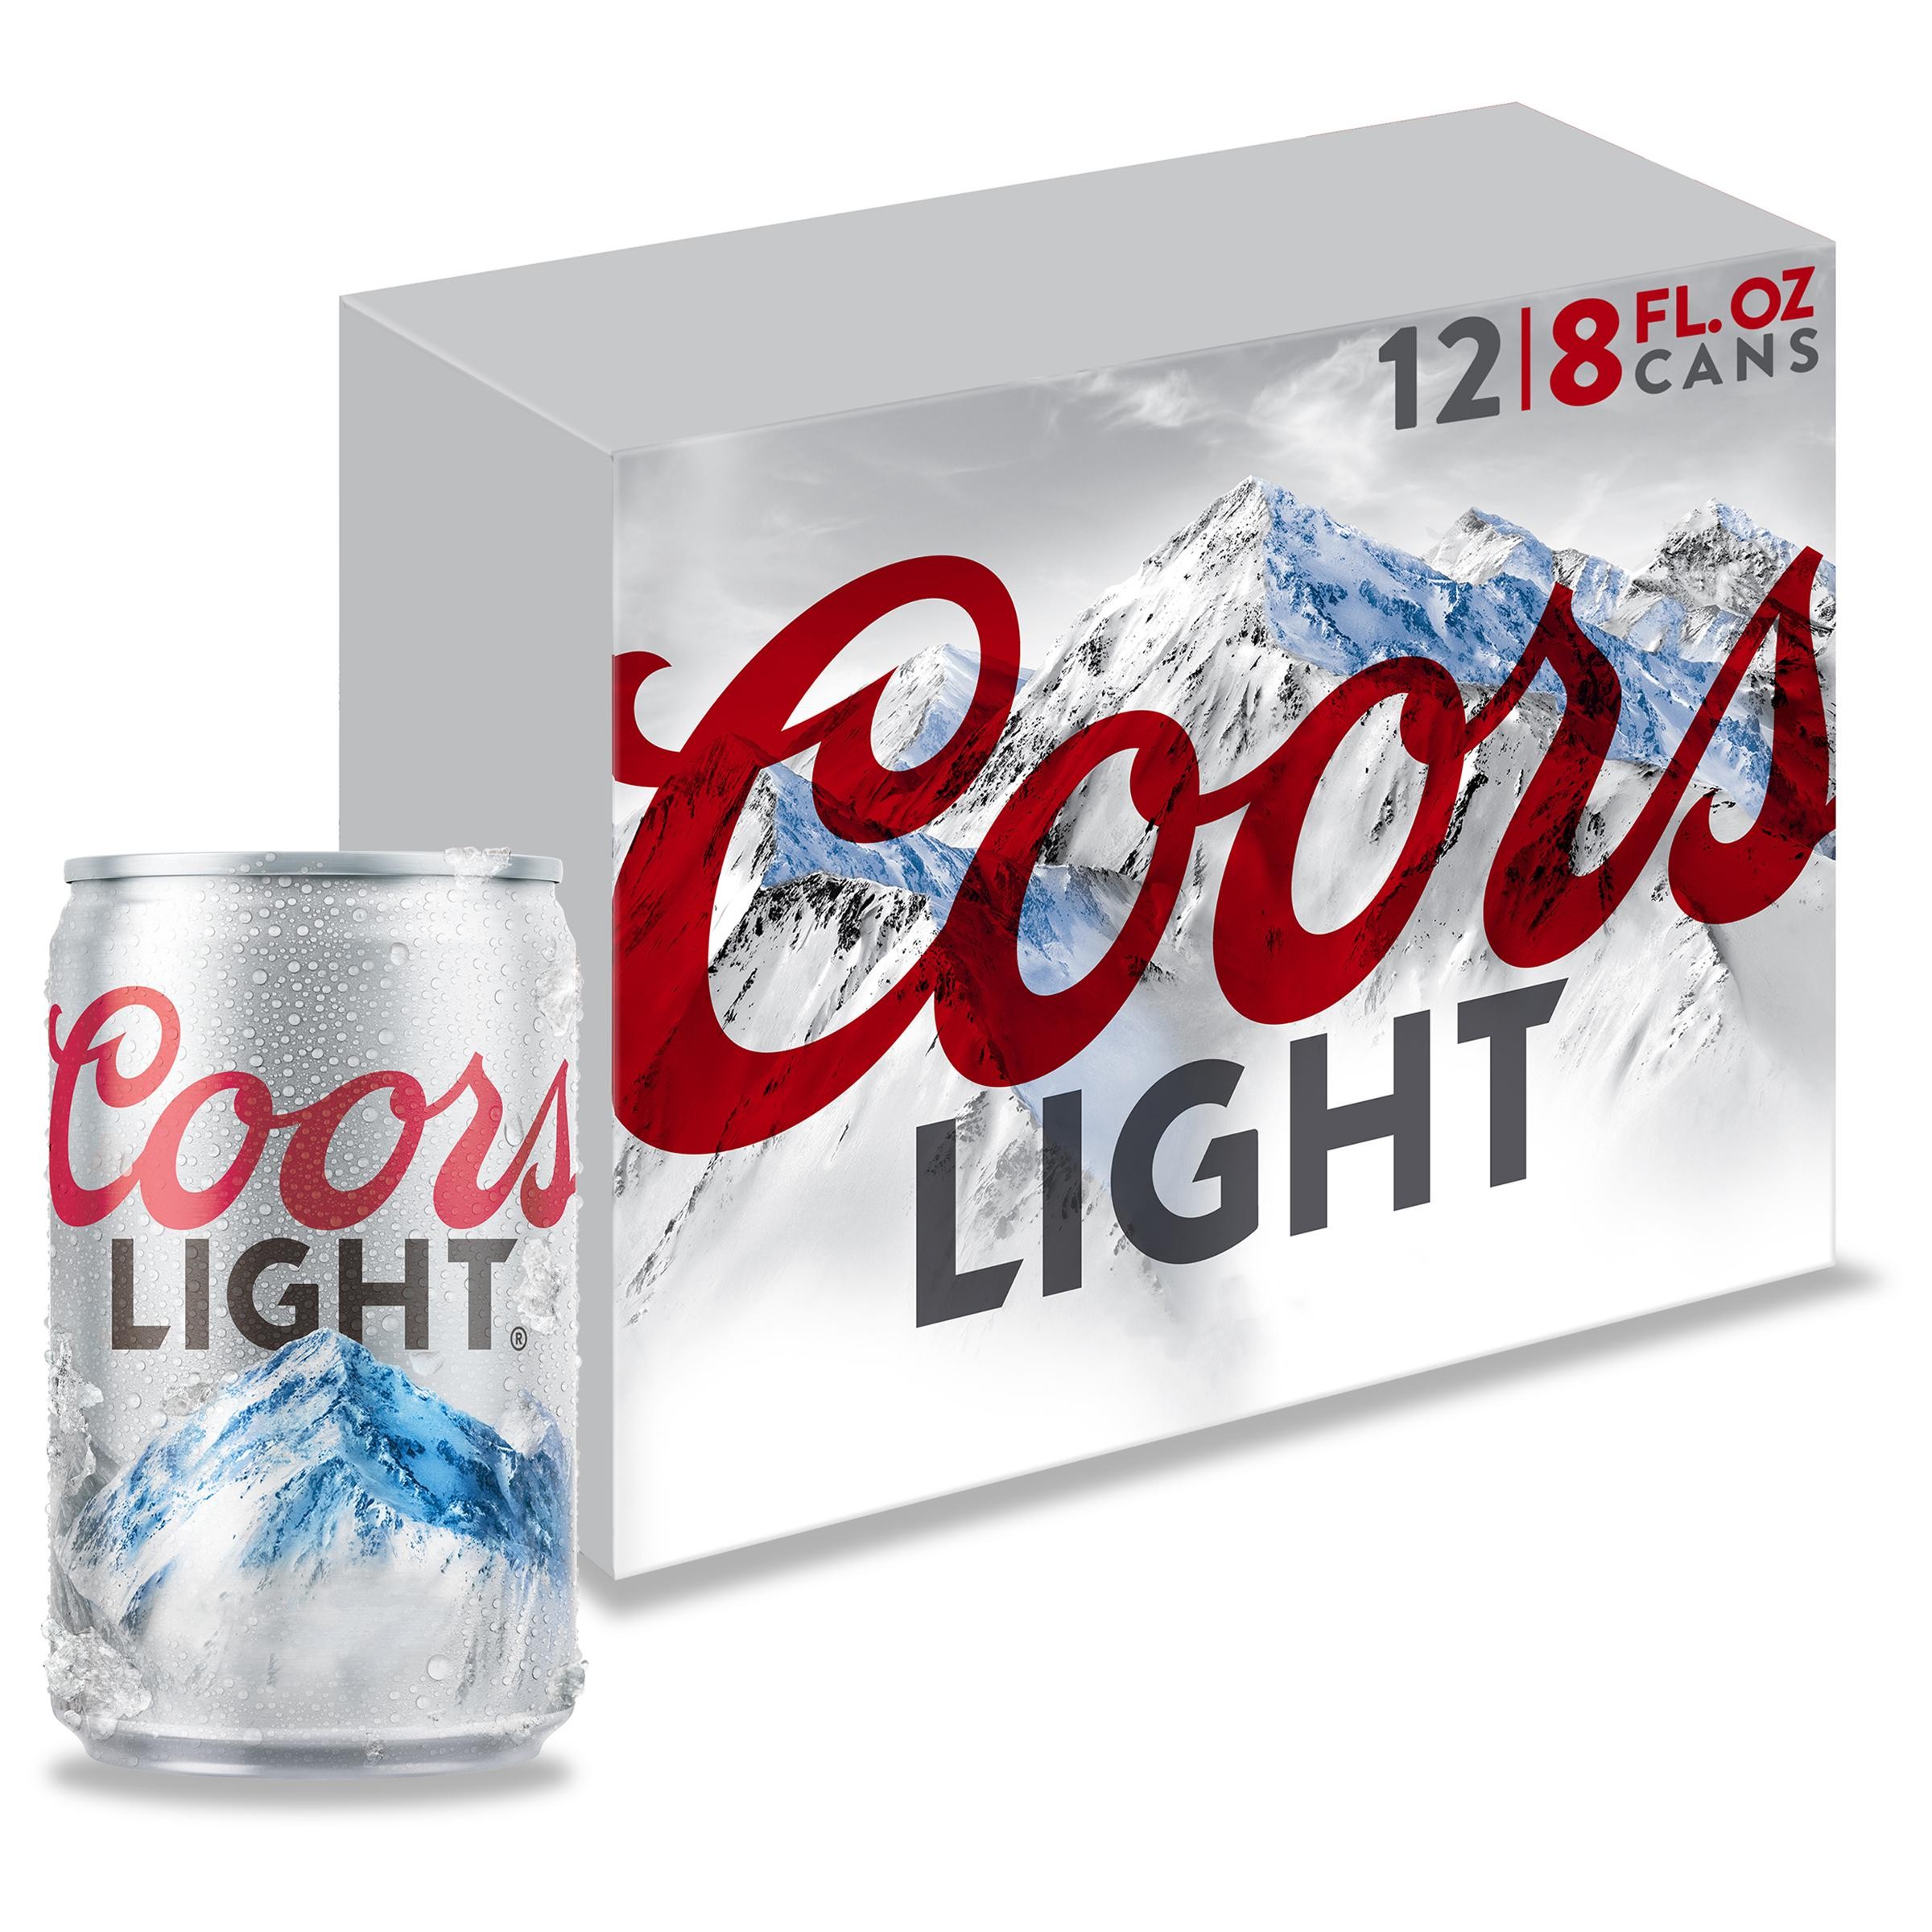 Coors Light Beer, American Light Lager, 12 Pack, 8 Fl. Oz. Cans, 4.2% ABV